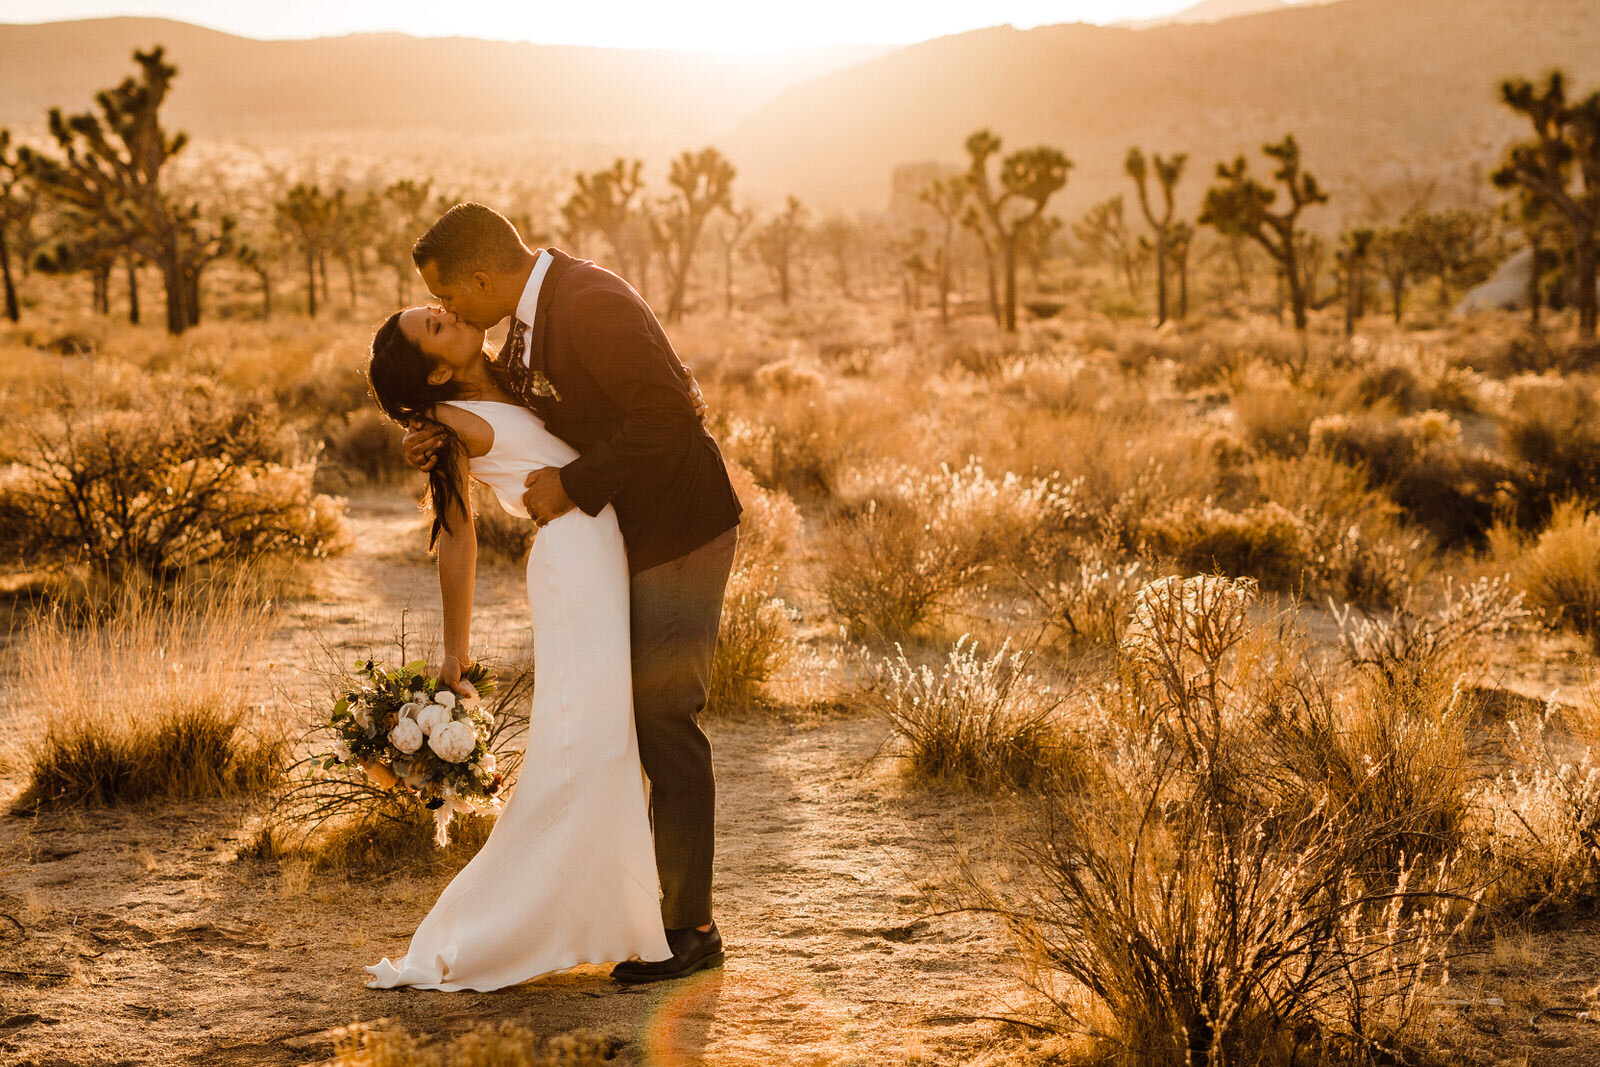 Joshua-Tree-Wedding-Photographer-Groom-Dips-Bride-At-Sunset-Surrounded-by-Cacti-In-Joshua-Tree-National-Park.jpg